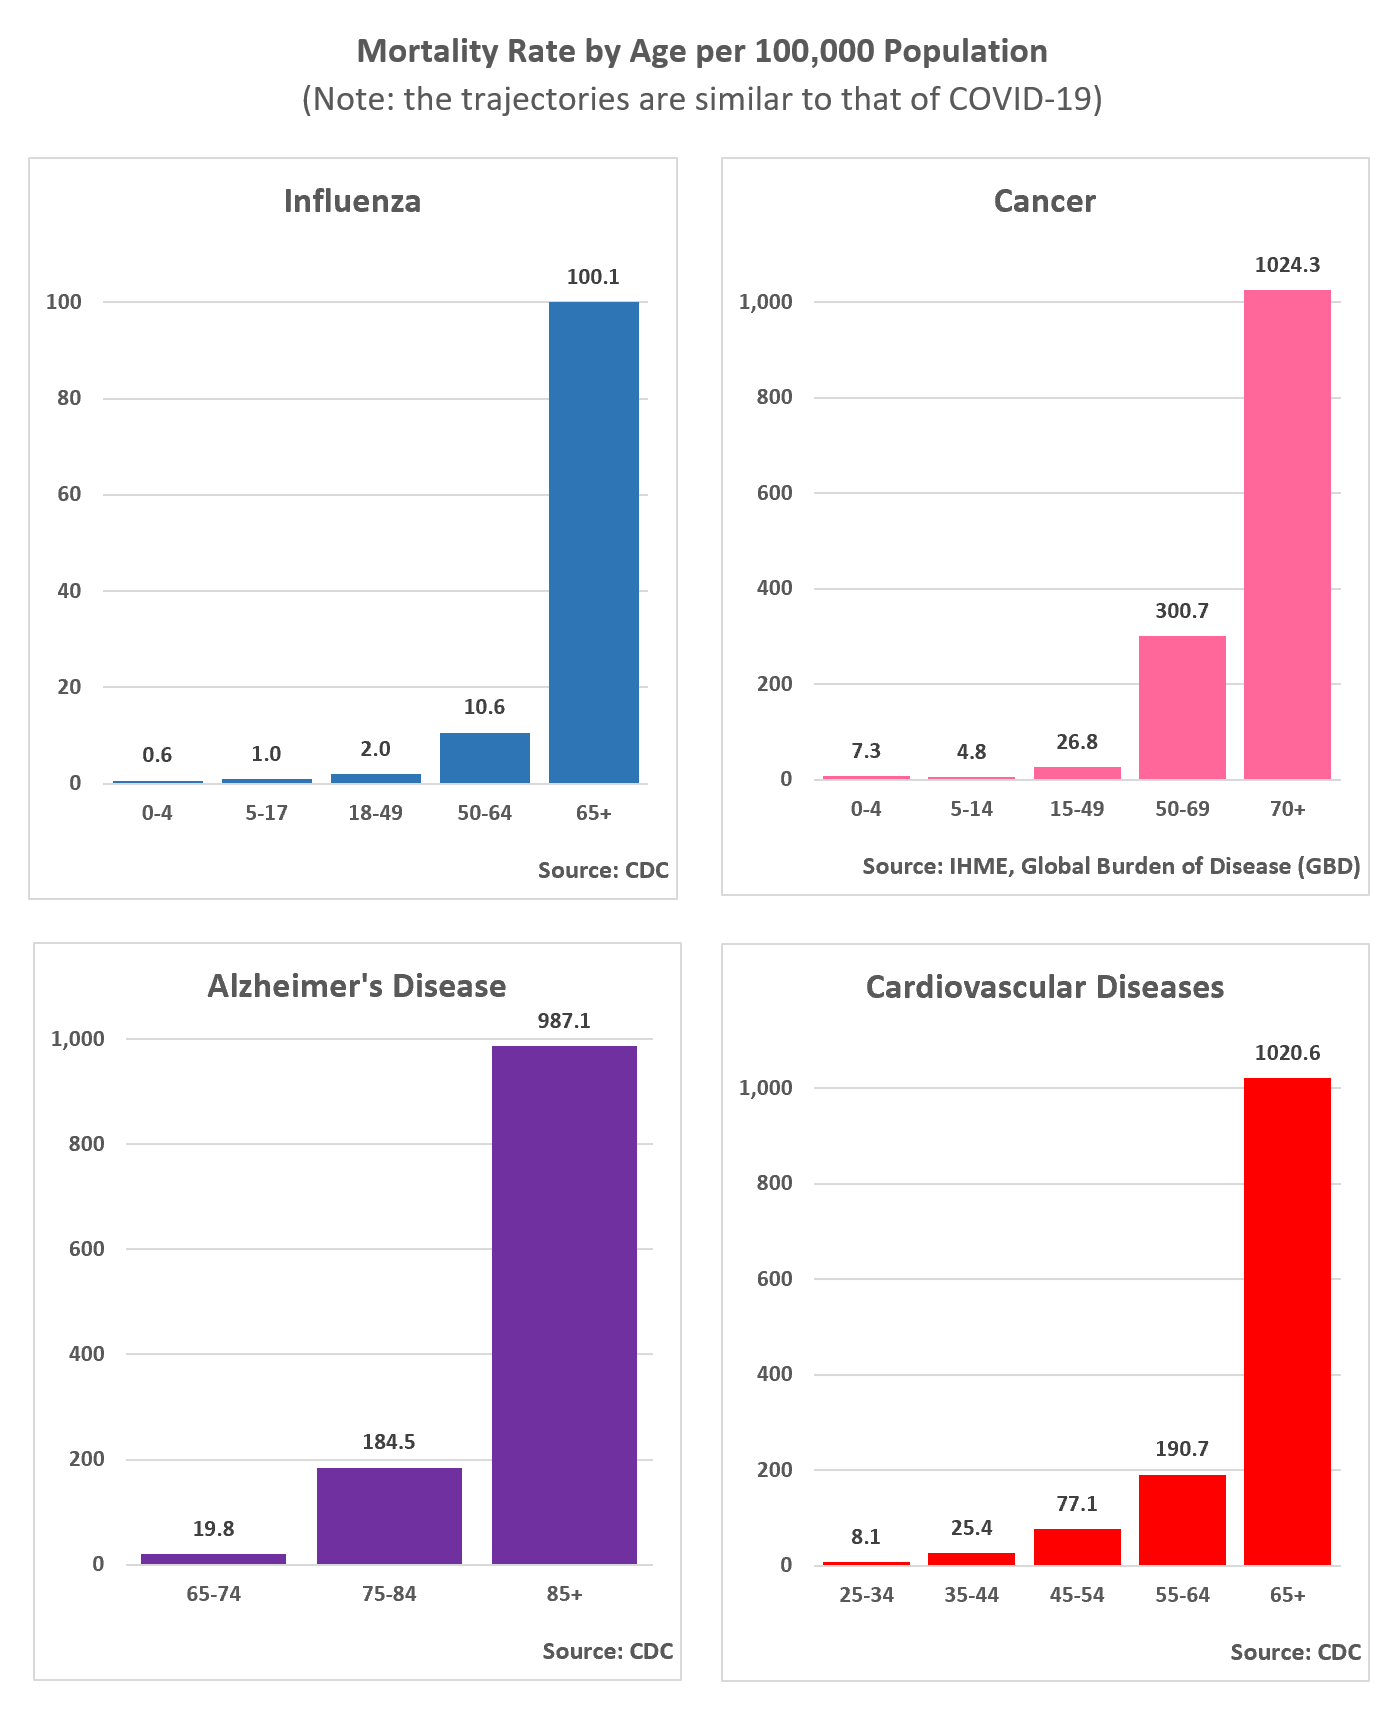 Mortality Rate by Age for Cancer, Alzheimers, Influenza, and Cardiovascular Diseases